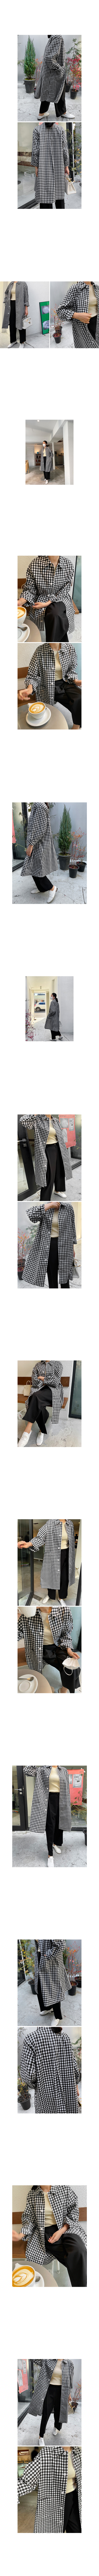 Single-Breasted Check Trench Coat|